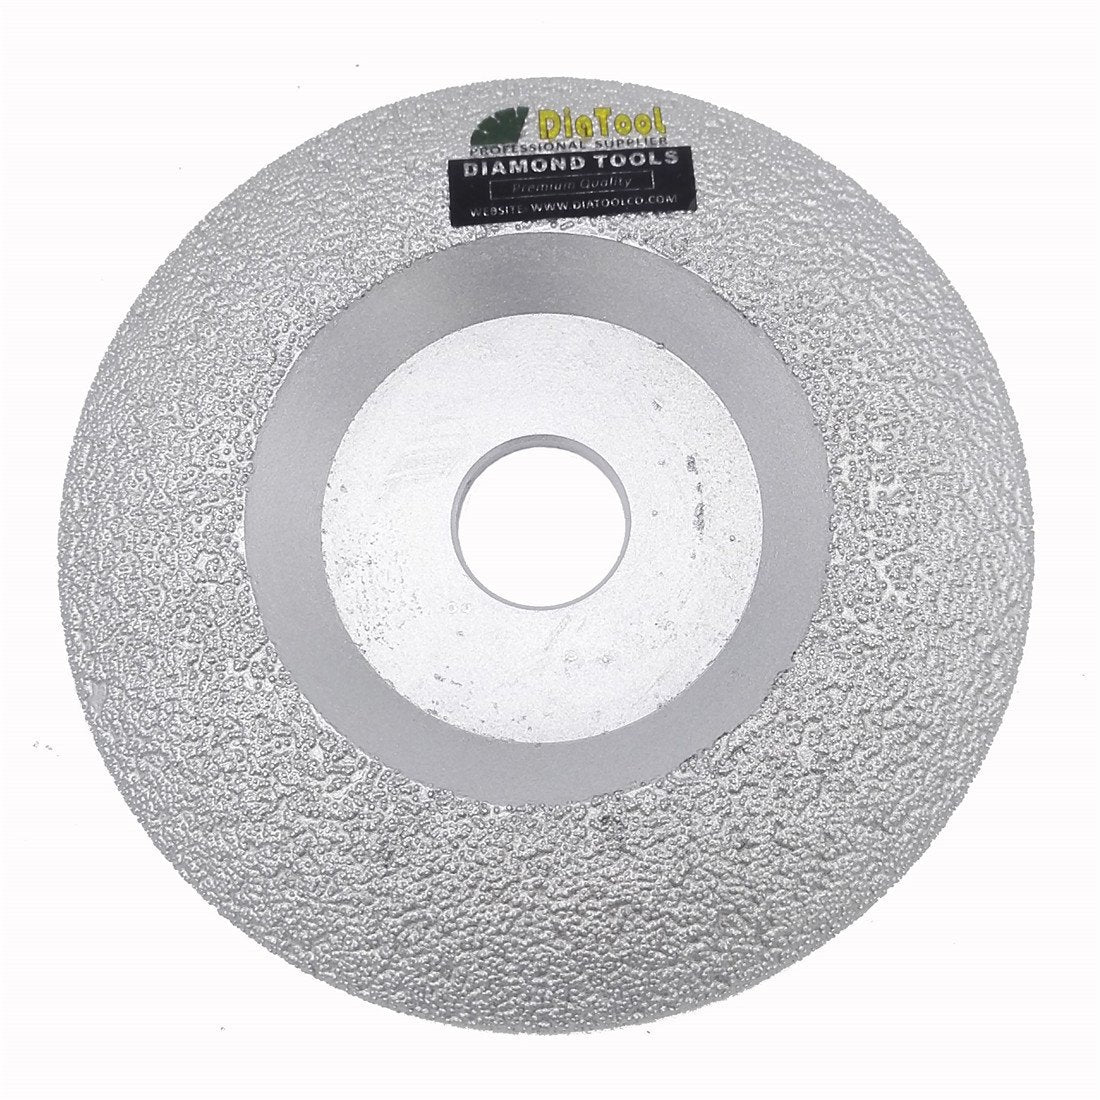 findmall 5 Inch Vacuum Brazed Diamond Grinding Disc Diamond Grinding Cup Wheel Fit for Granite Marble Iron Steel Masonry Convex Vacuum Brazed Grinding Disc Fits 7/8 Inch Arbor FINDMALLPARTS